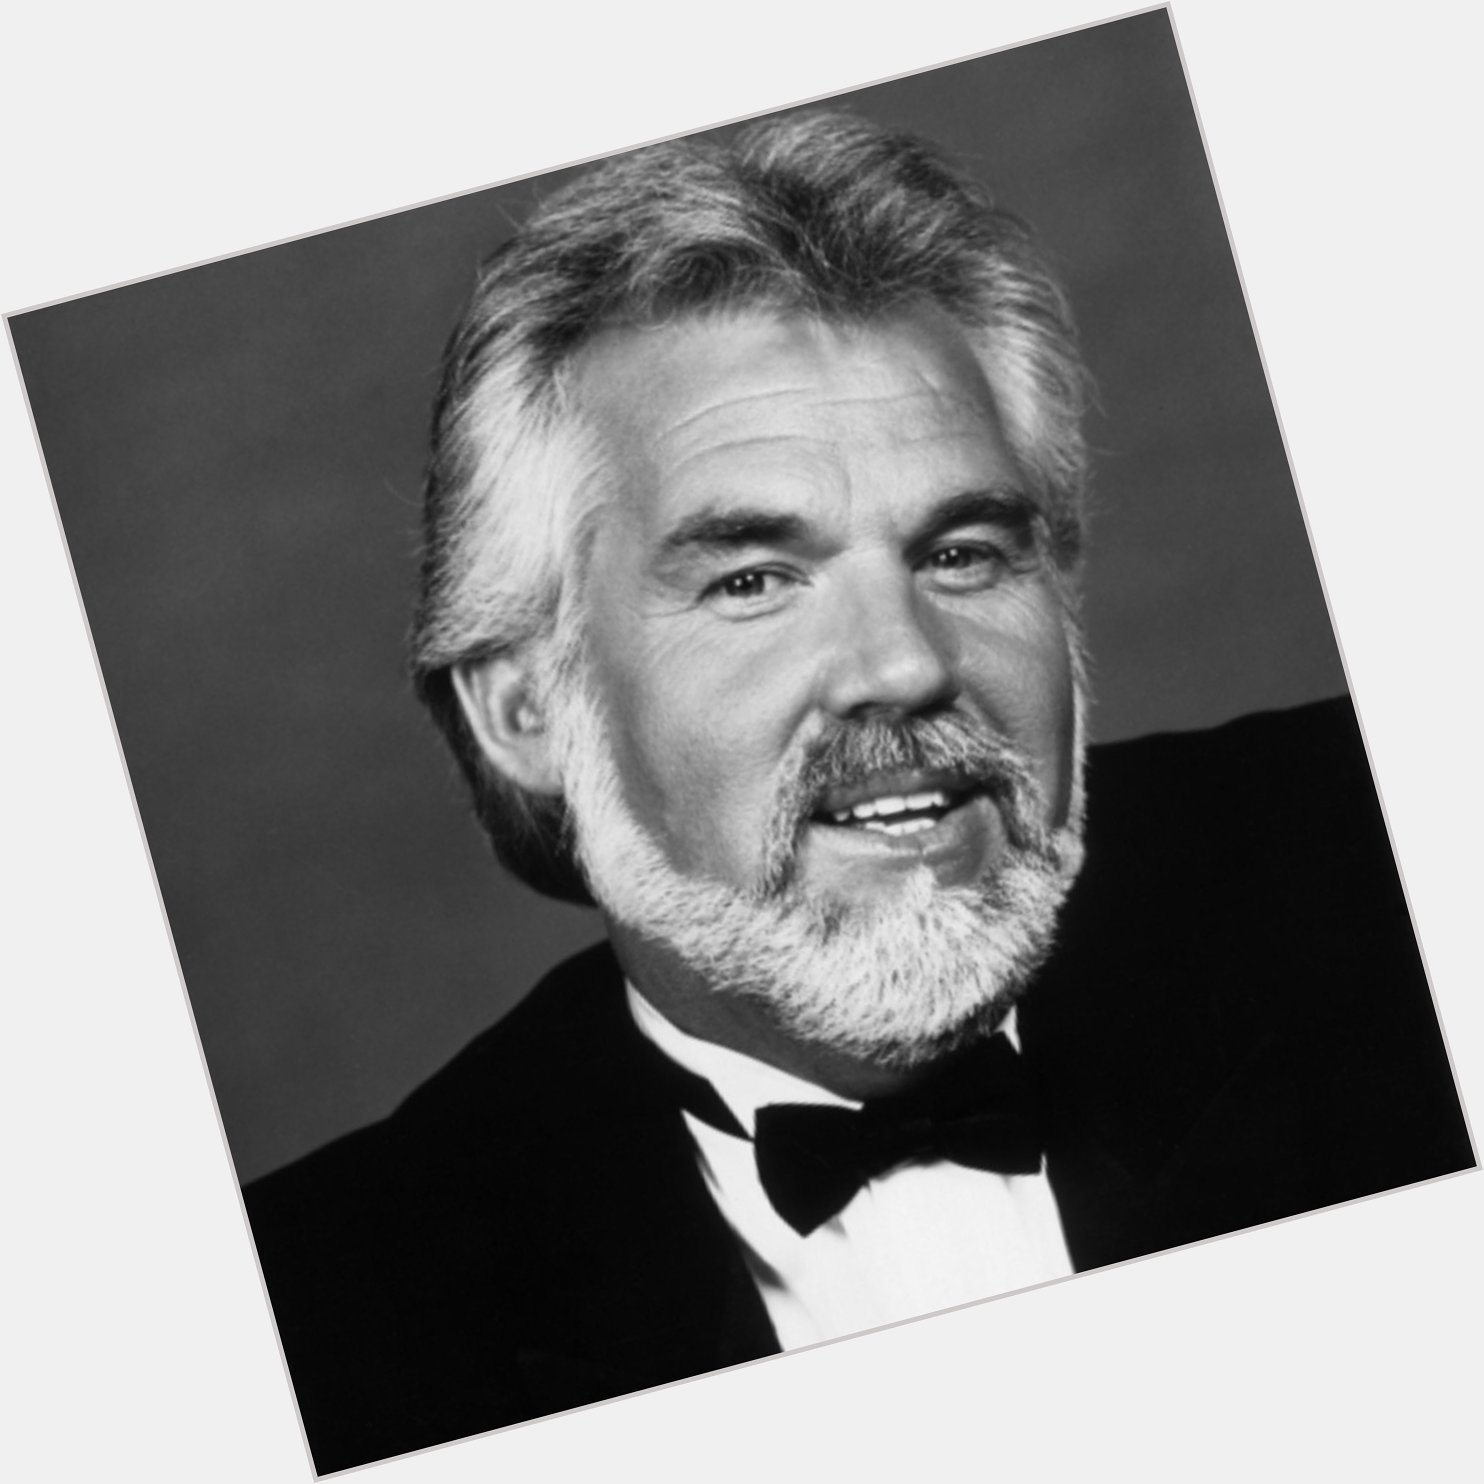 Happy 81st Birthday to The Gambler, Kenny Rogers! 